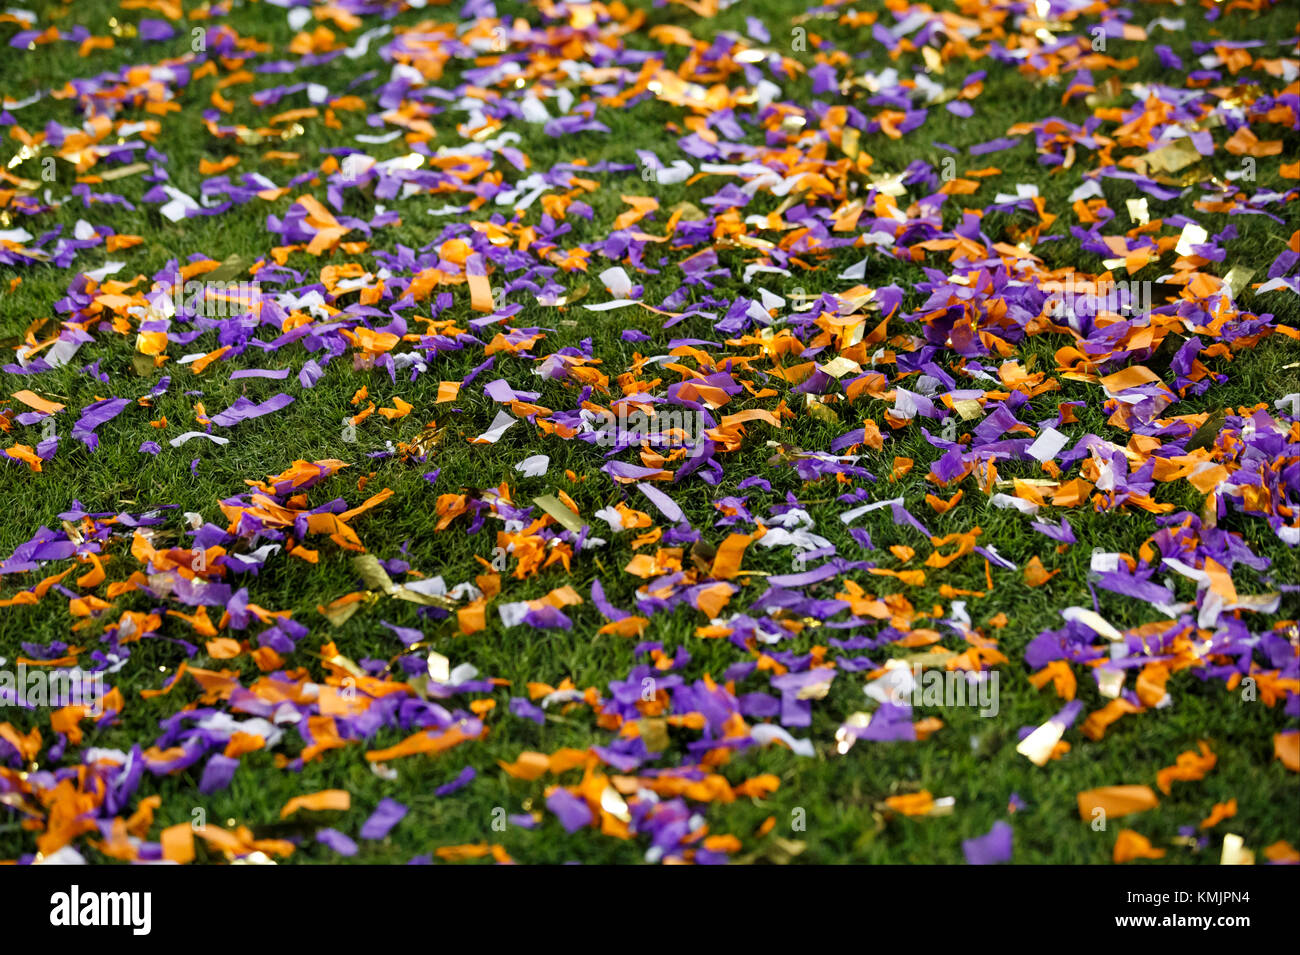 JANUARY 9, 2017: Clemson Tigers confetti lays on the field after the Clemson Tigers won the 2017 College Football Playoff National Championship game a Stock Photo